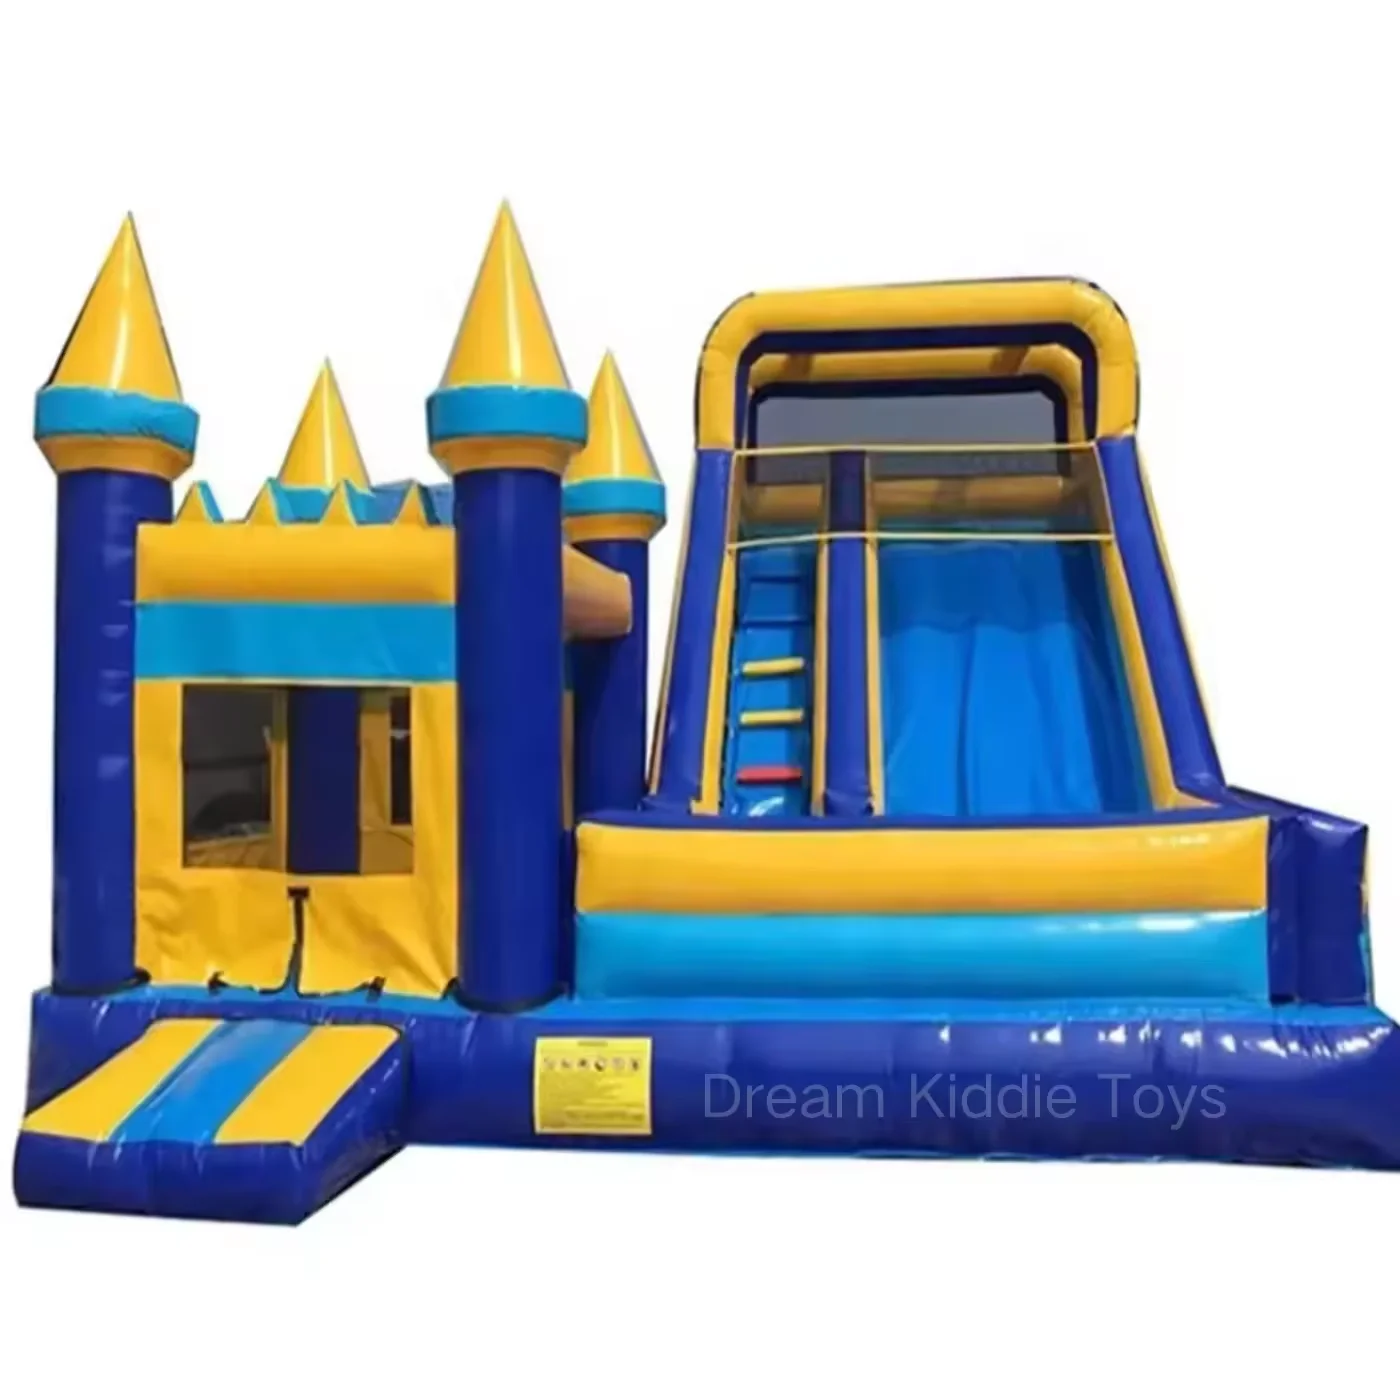 

Giant 20x20FT Adults&Kids Bounce house slide obstacle Bouncy Jumping Castle combo moonwalk mutifunction